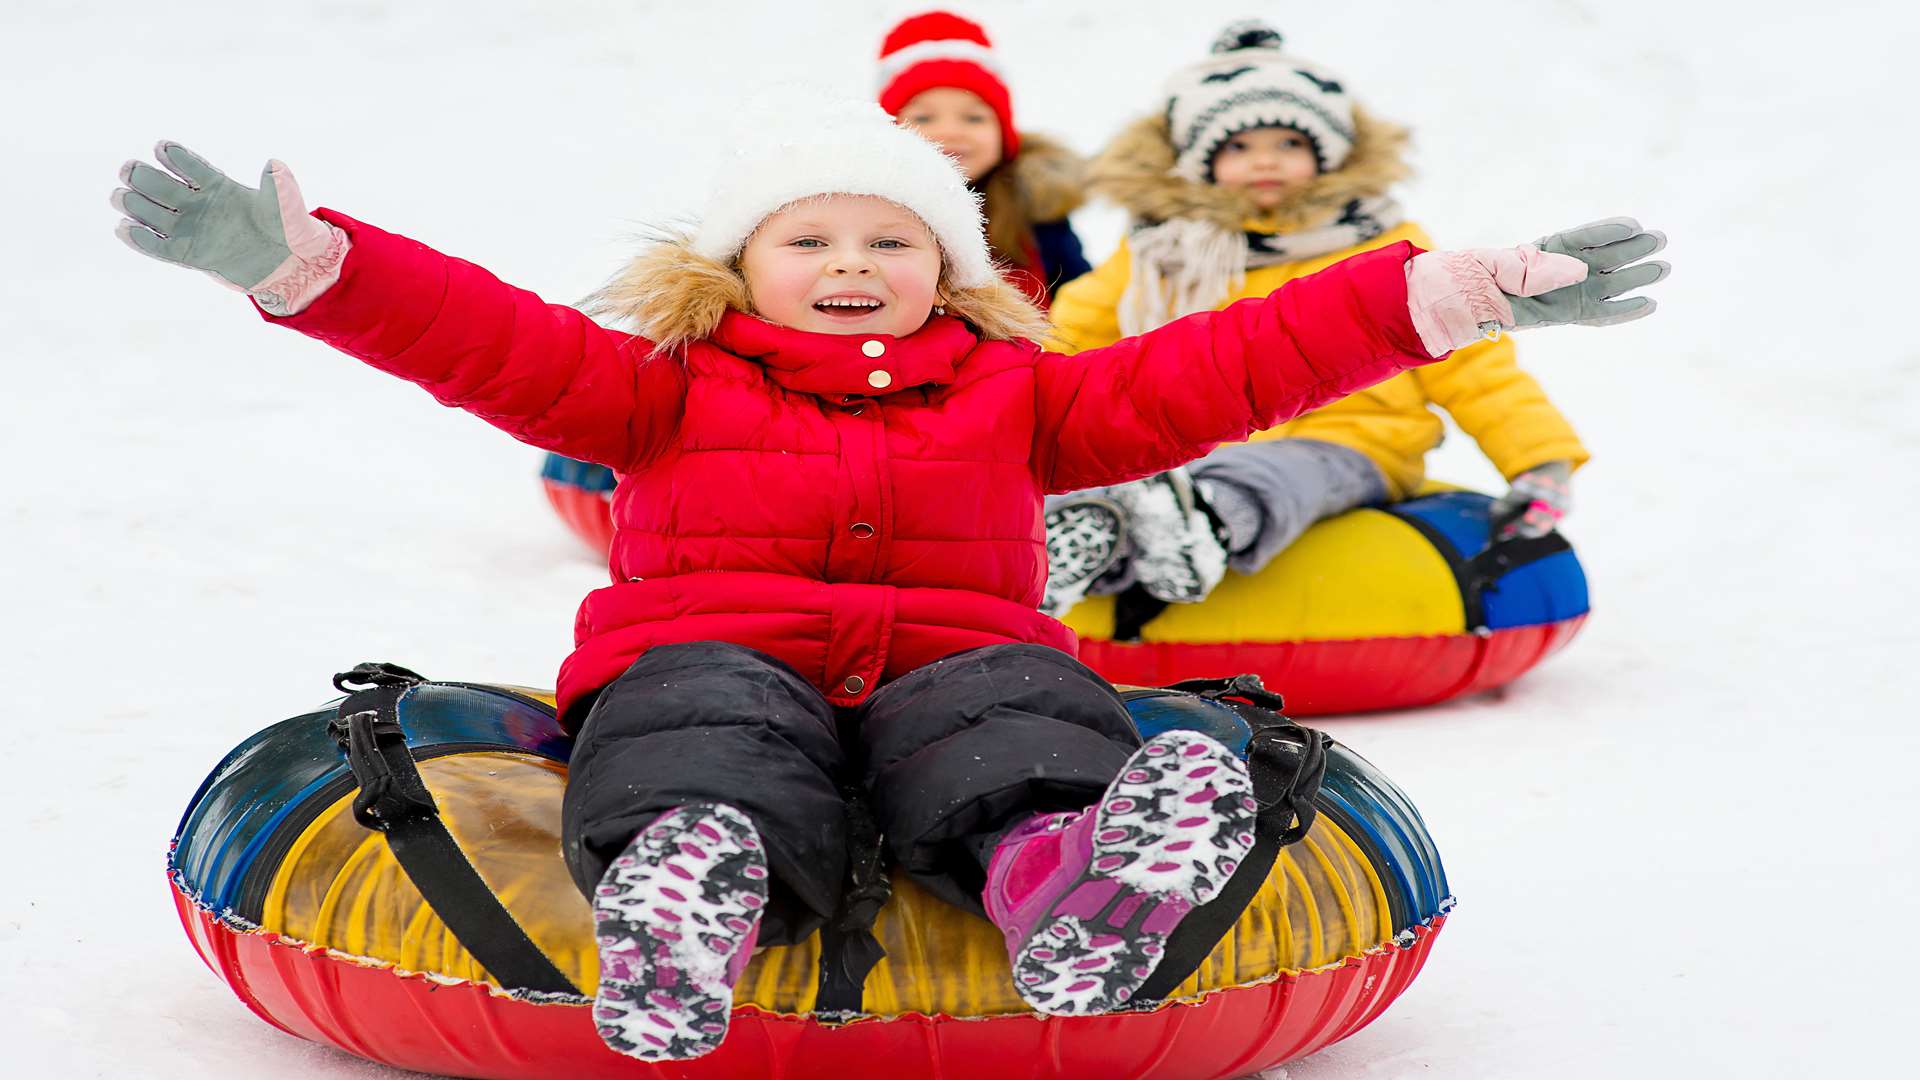 Snow tubing at Betteshanger this Christmas